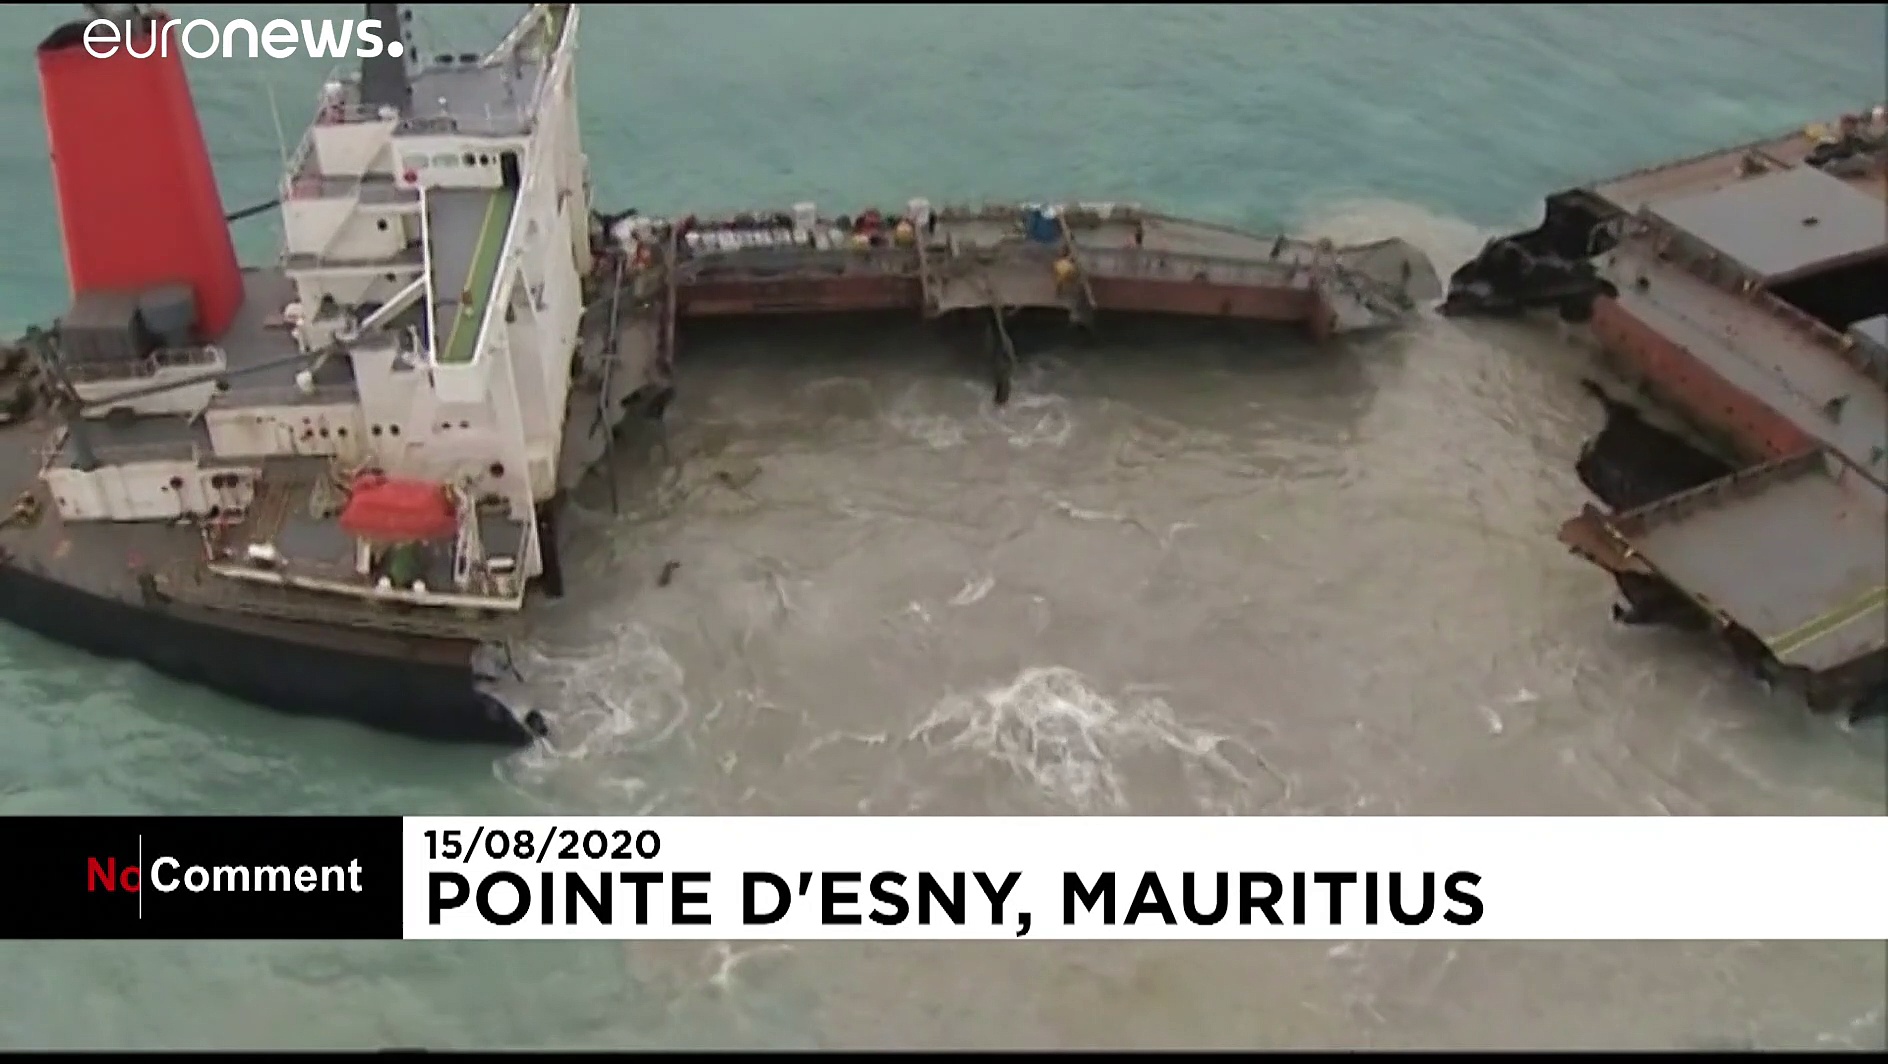 Stranded tanker breaks in two off the coast of Mauritius